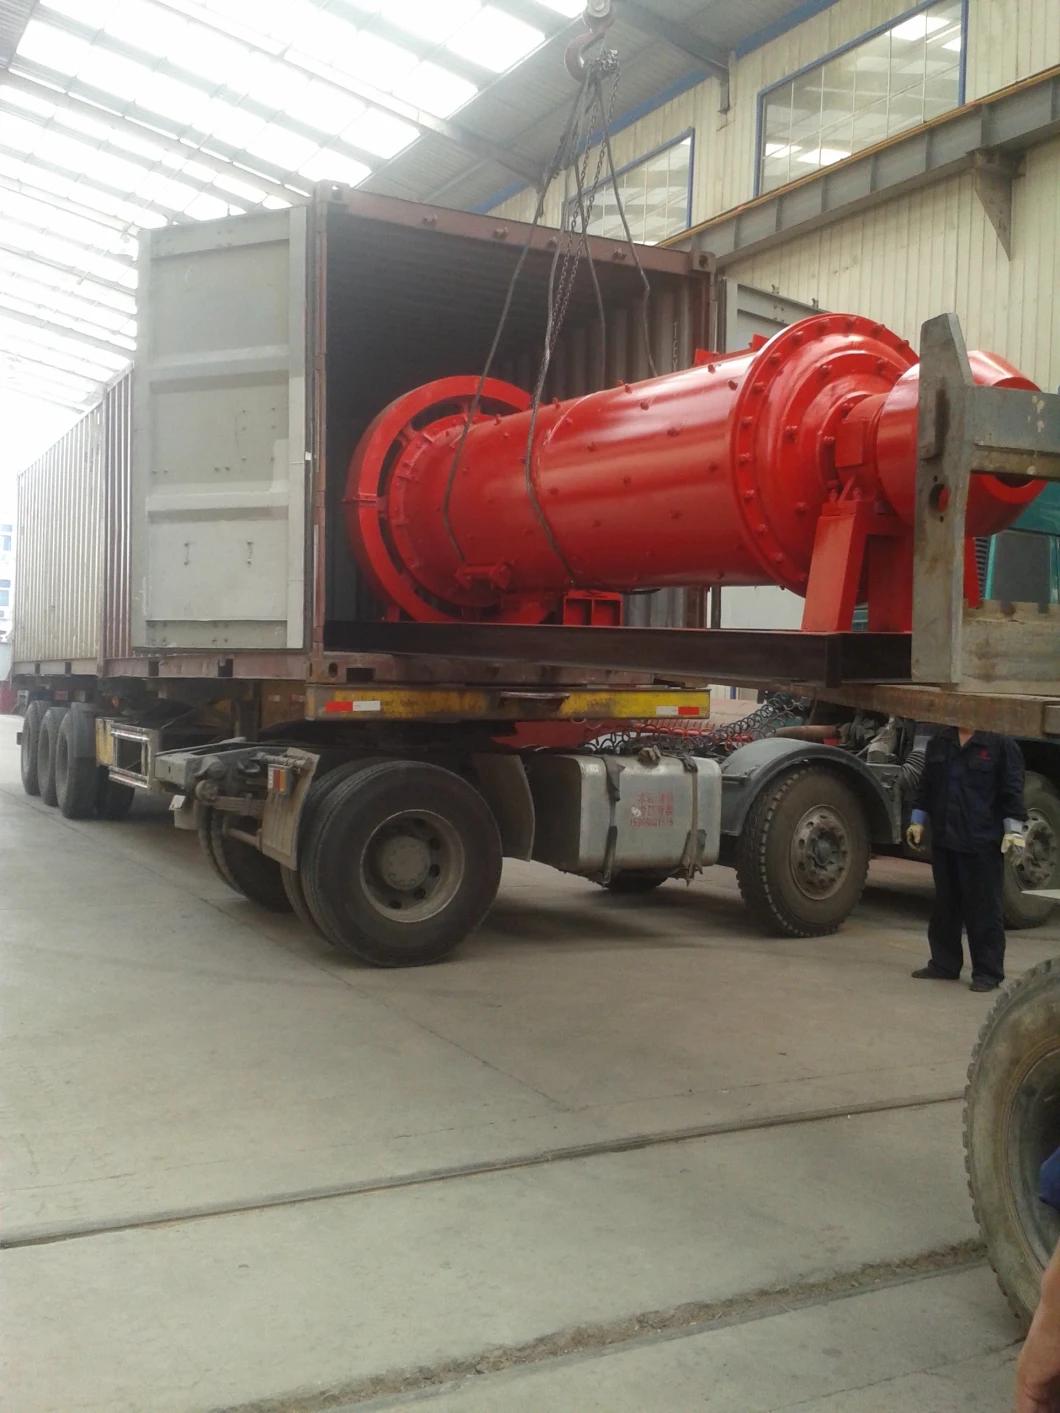 Mining Equipment Ball Mill for Gold Ore, Rock, Copper, Cement Grinding